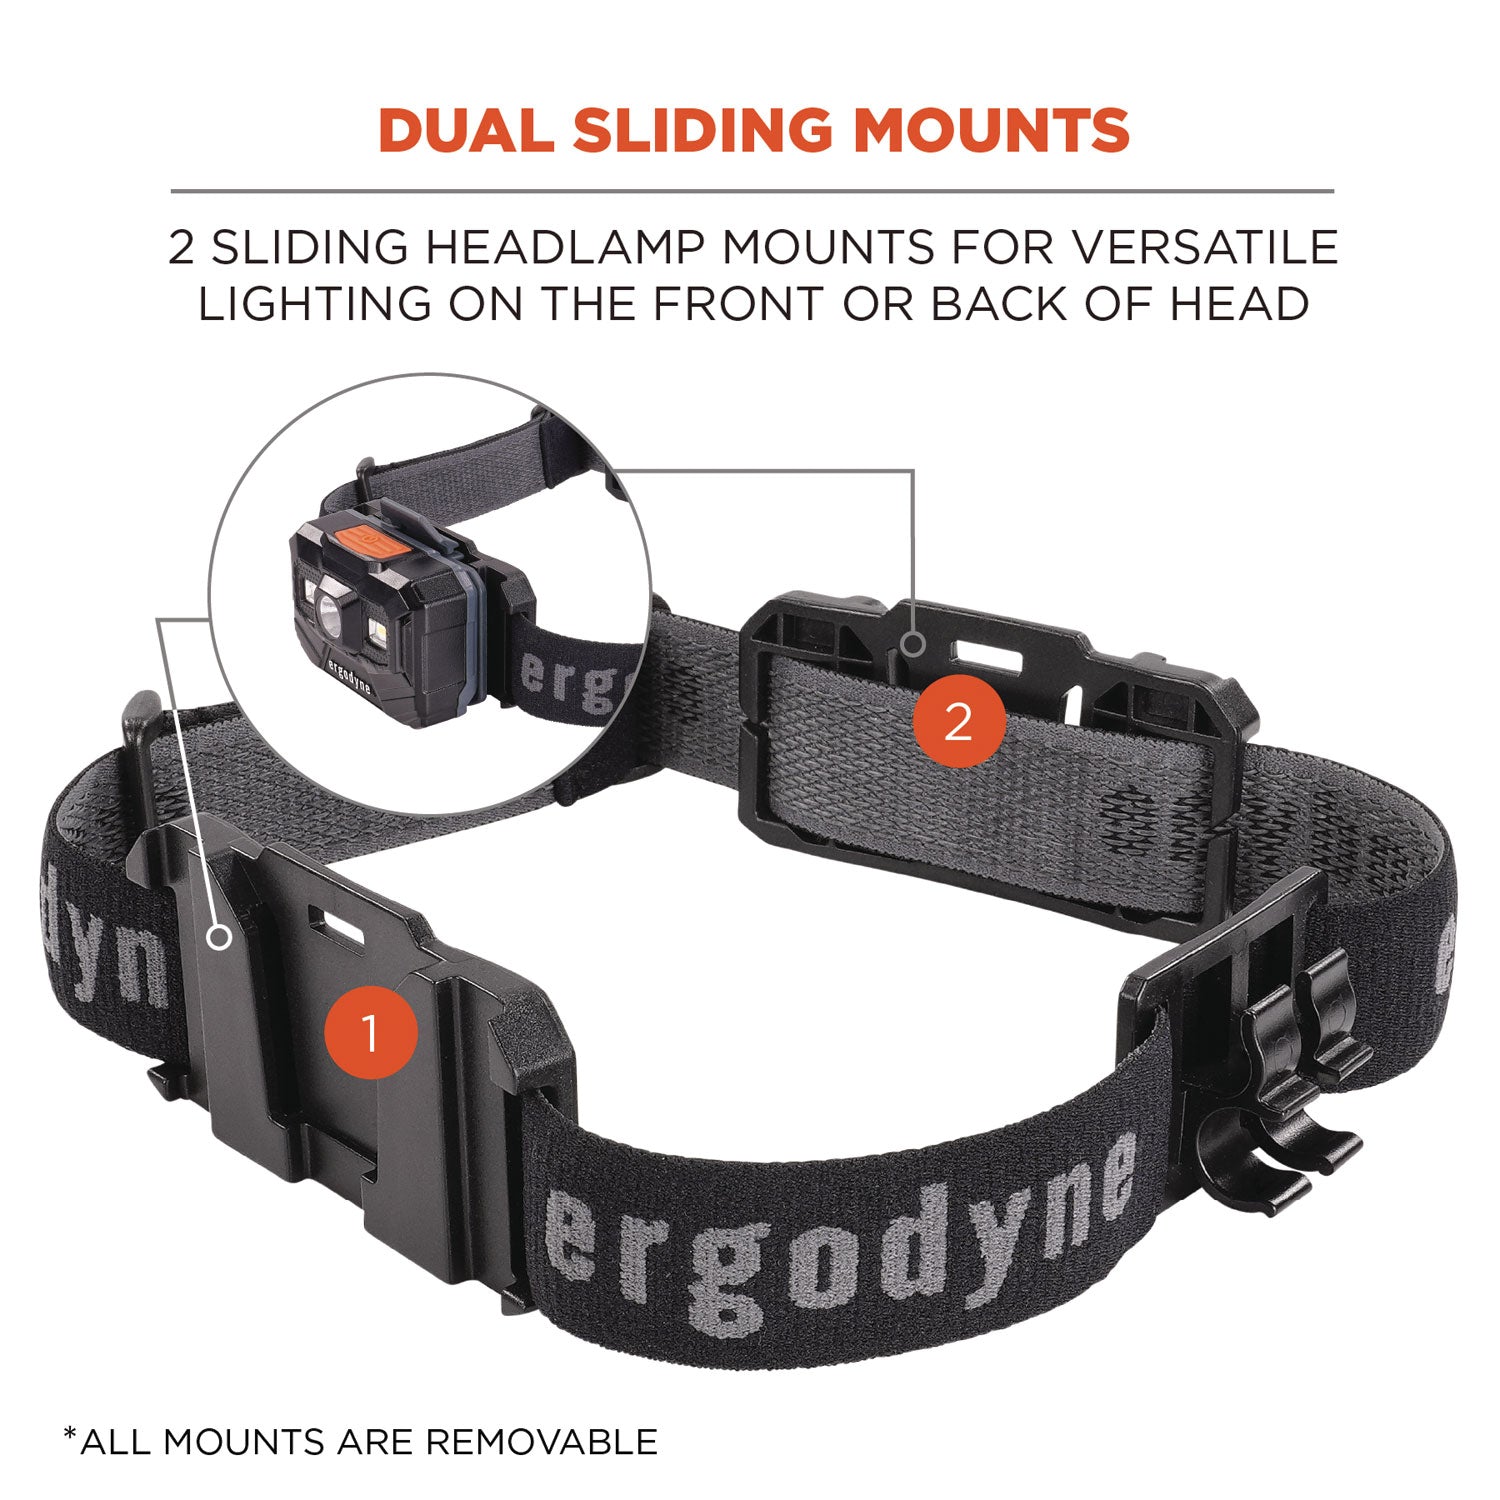 skullerz-8980-headband-light-mount-with-fabric-strap-ships-in-1-3-business-days_ego60292 - 2